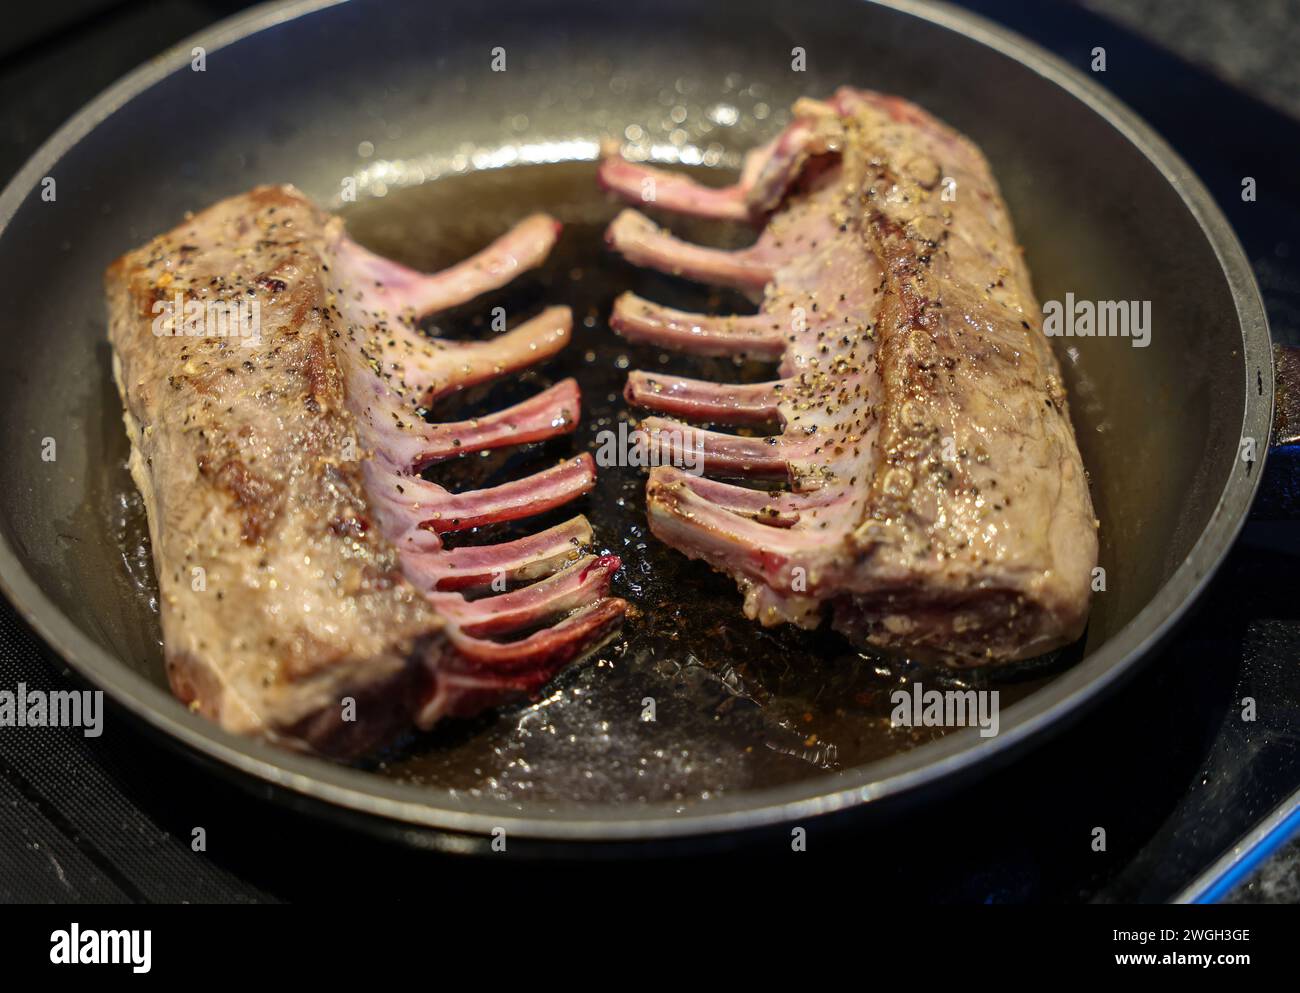 Spiced saddle of lamb grilled in a pan Stock Photo